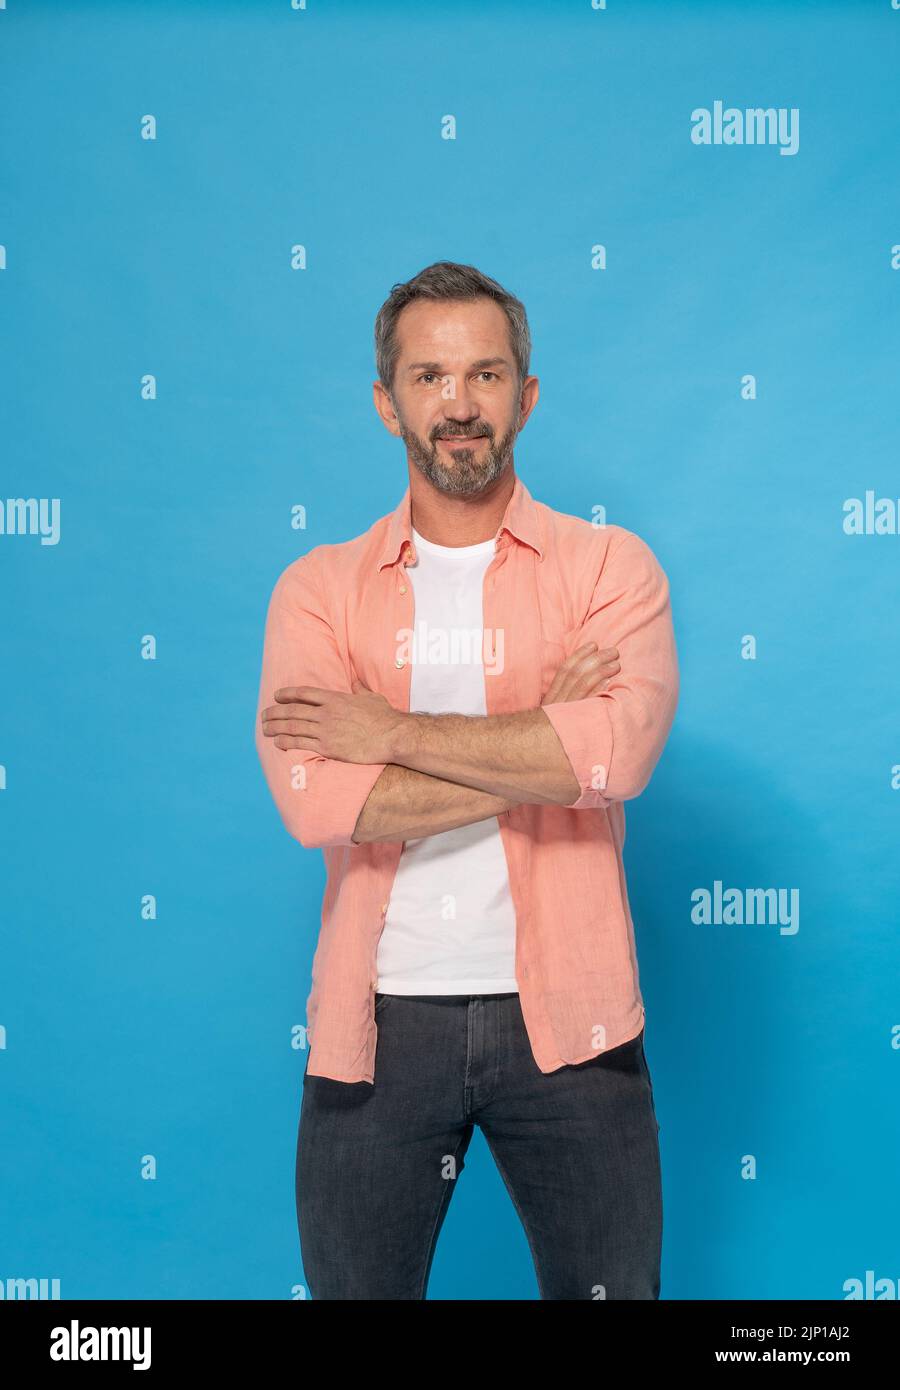 Strong handsome middle aged man with grey beard 40s, 50s wearing casual isolated on blue background. Smiling mature muscular, fit, athletic man posing in studio. Mature fit man health and physics.  Stock Photo